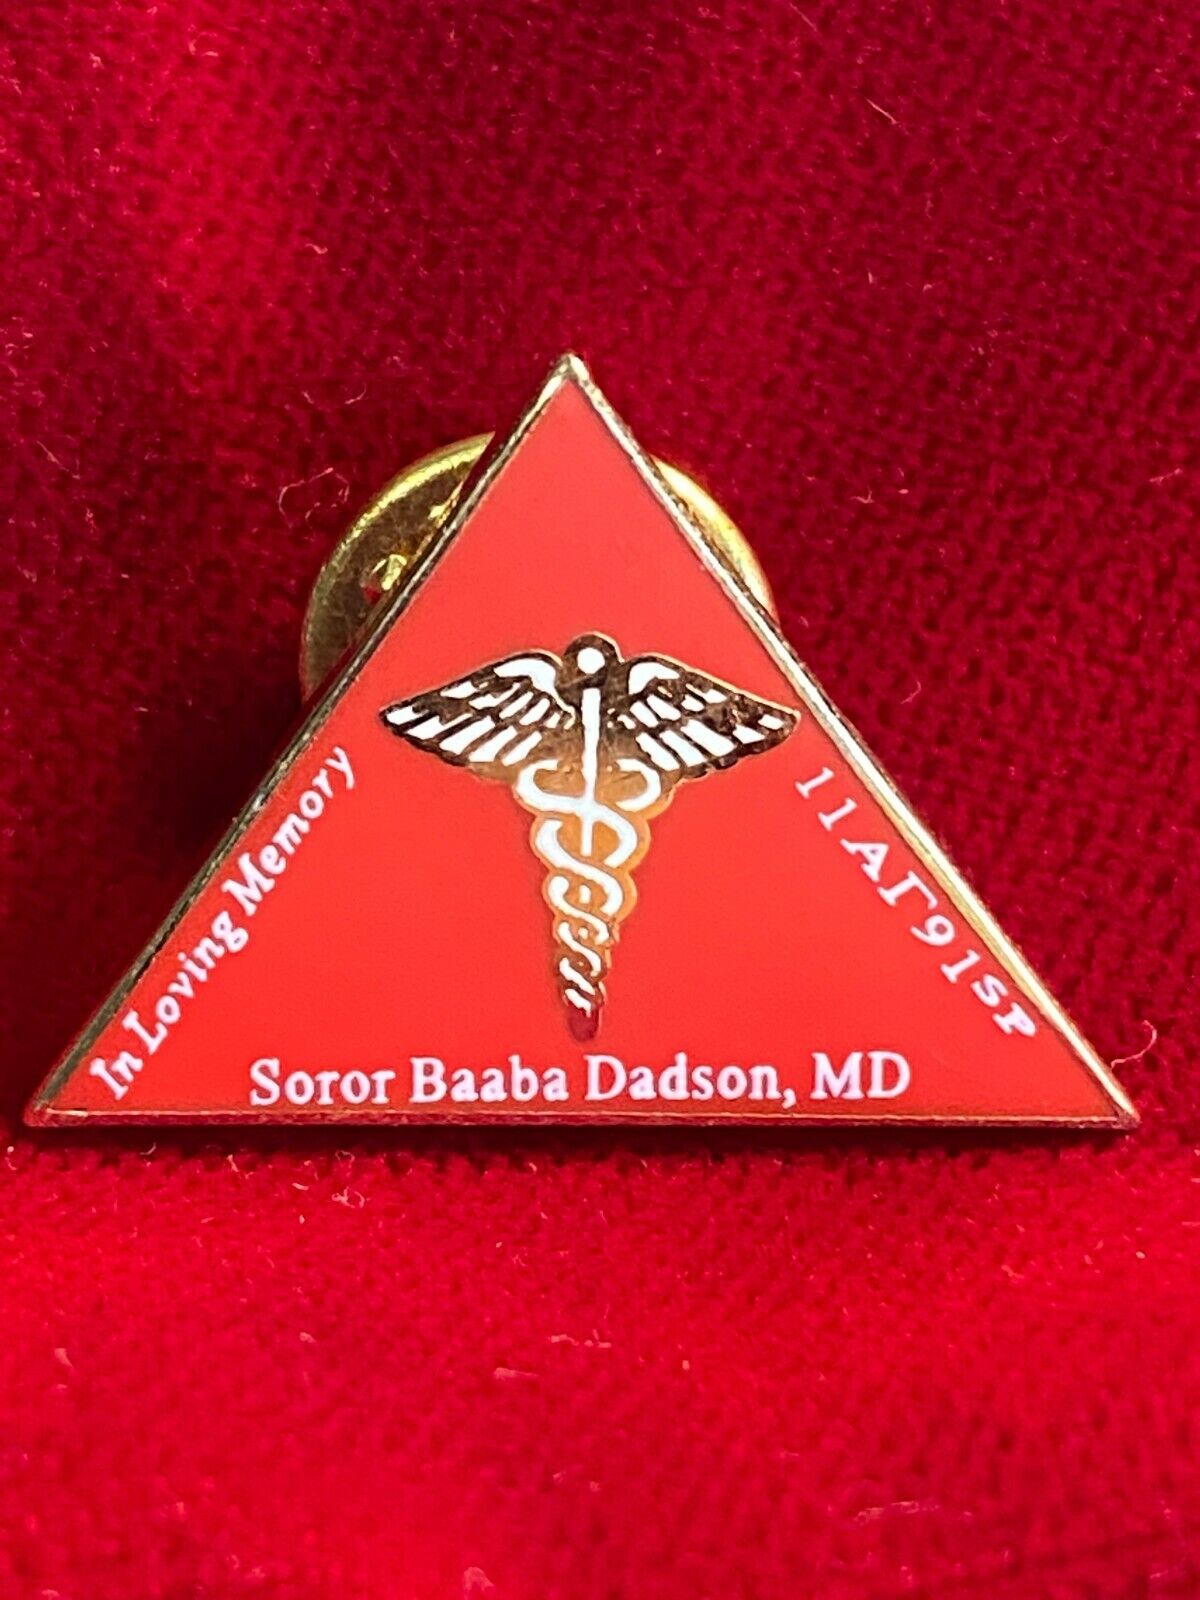 In Memory Soror Baaba Dadson MD Hermes Staff Medical Cloisonné Tie Lapel Pin 1\